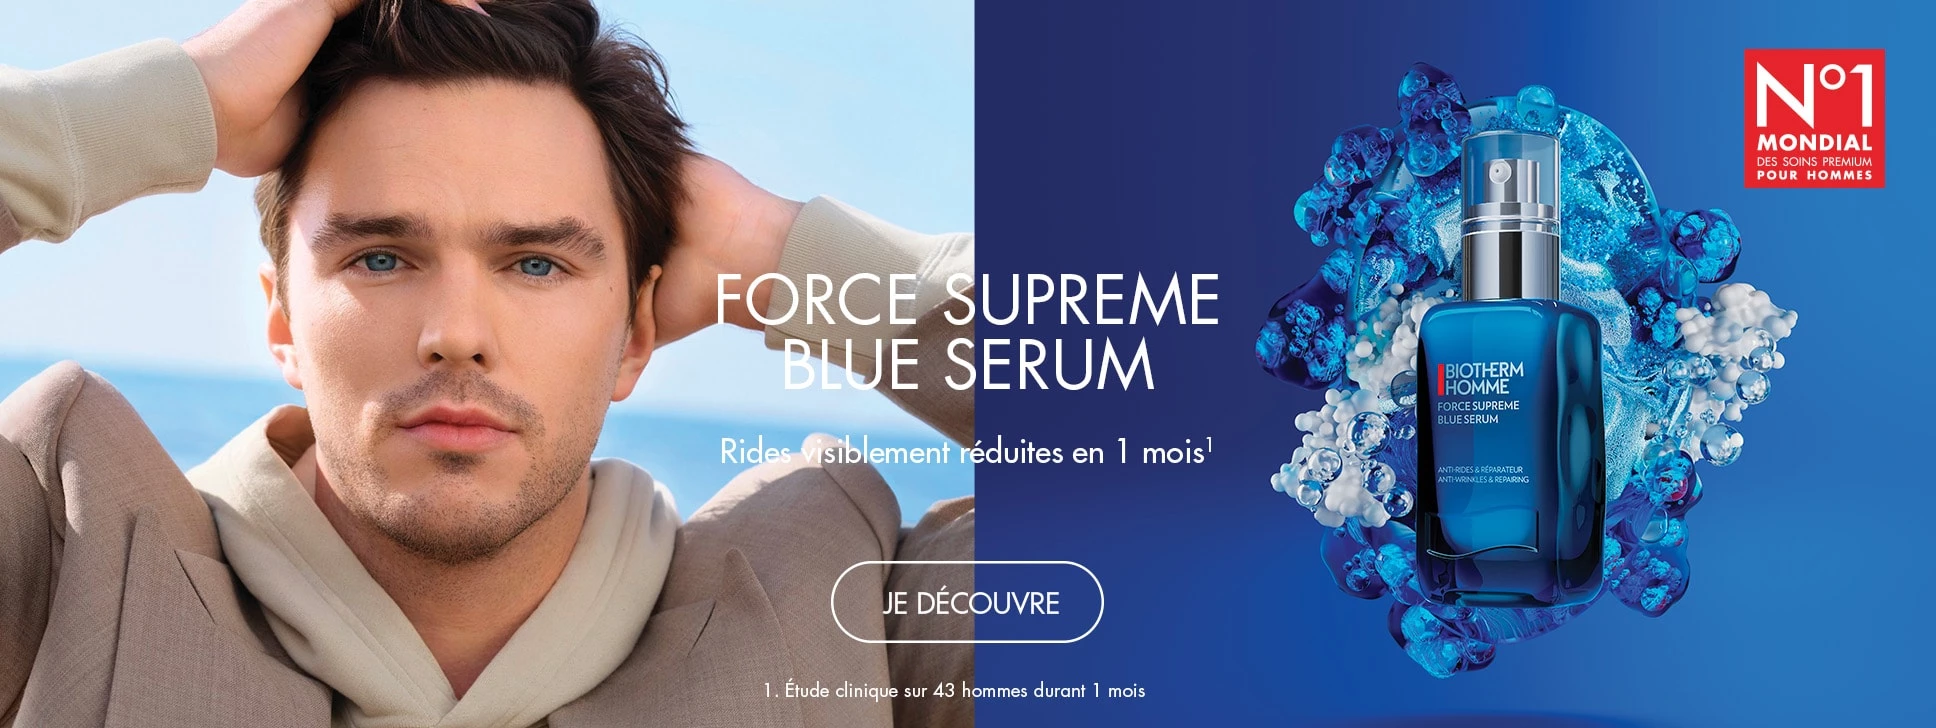 Biotherm Homme : Marque N°1 Mondiale* | 30 ans d'expertise soin pour homme